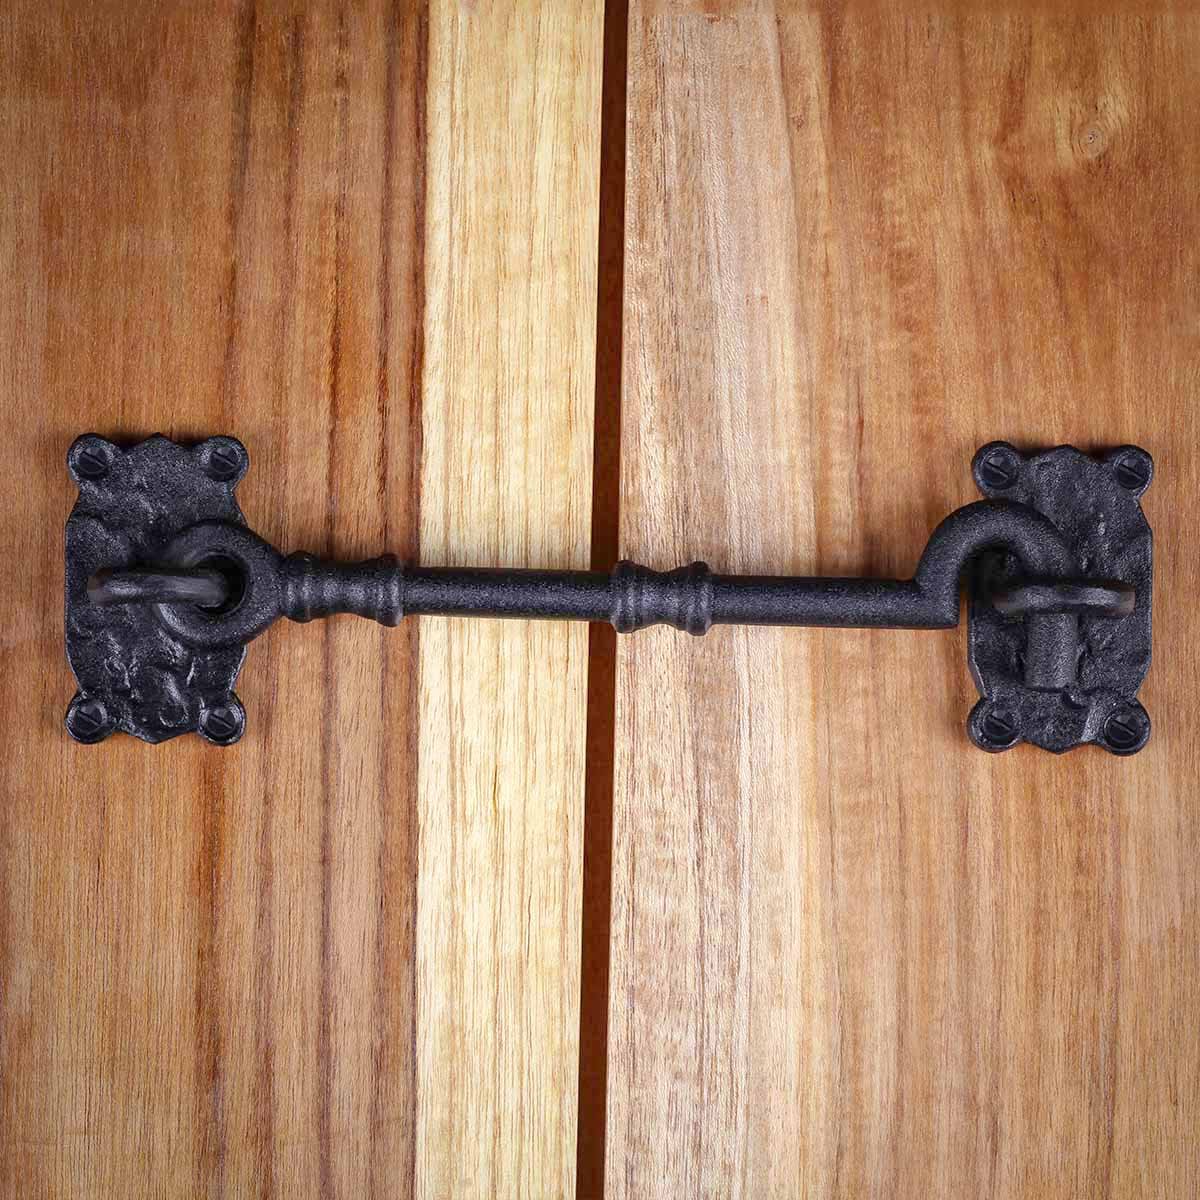 https://wroughtworks.com/images/wrought-iron/wrought-iron-cabin-hook-eye-bolt-latch-7.25-inch.jpg